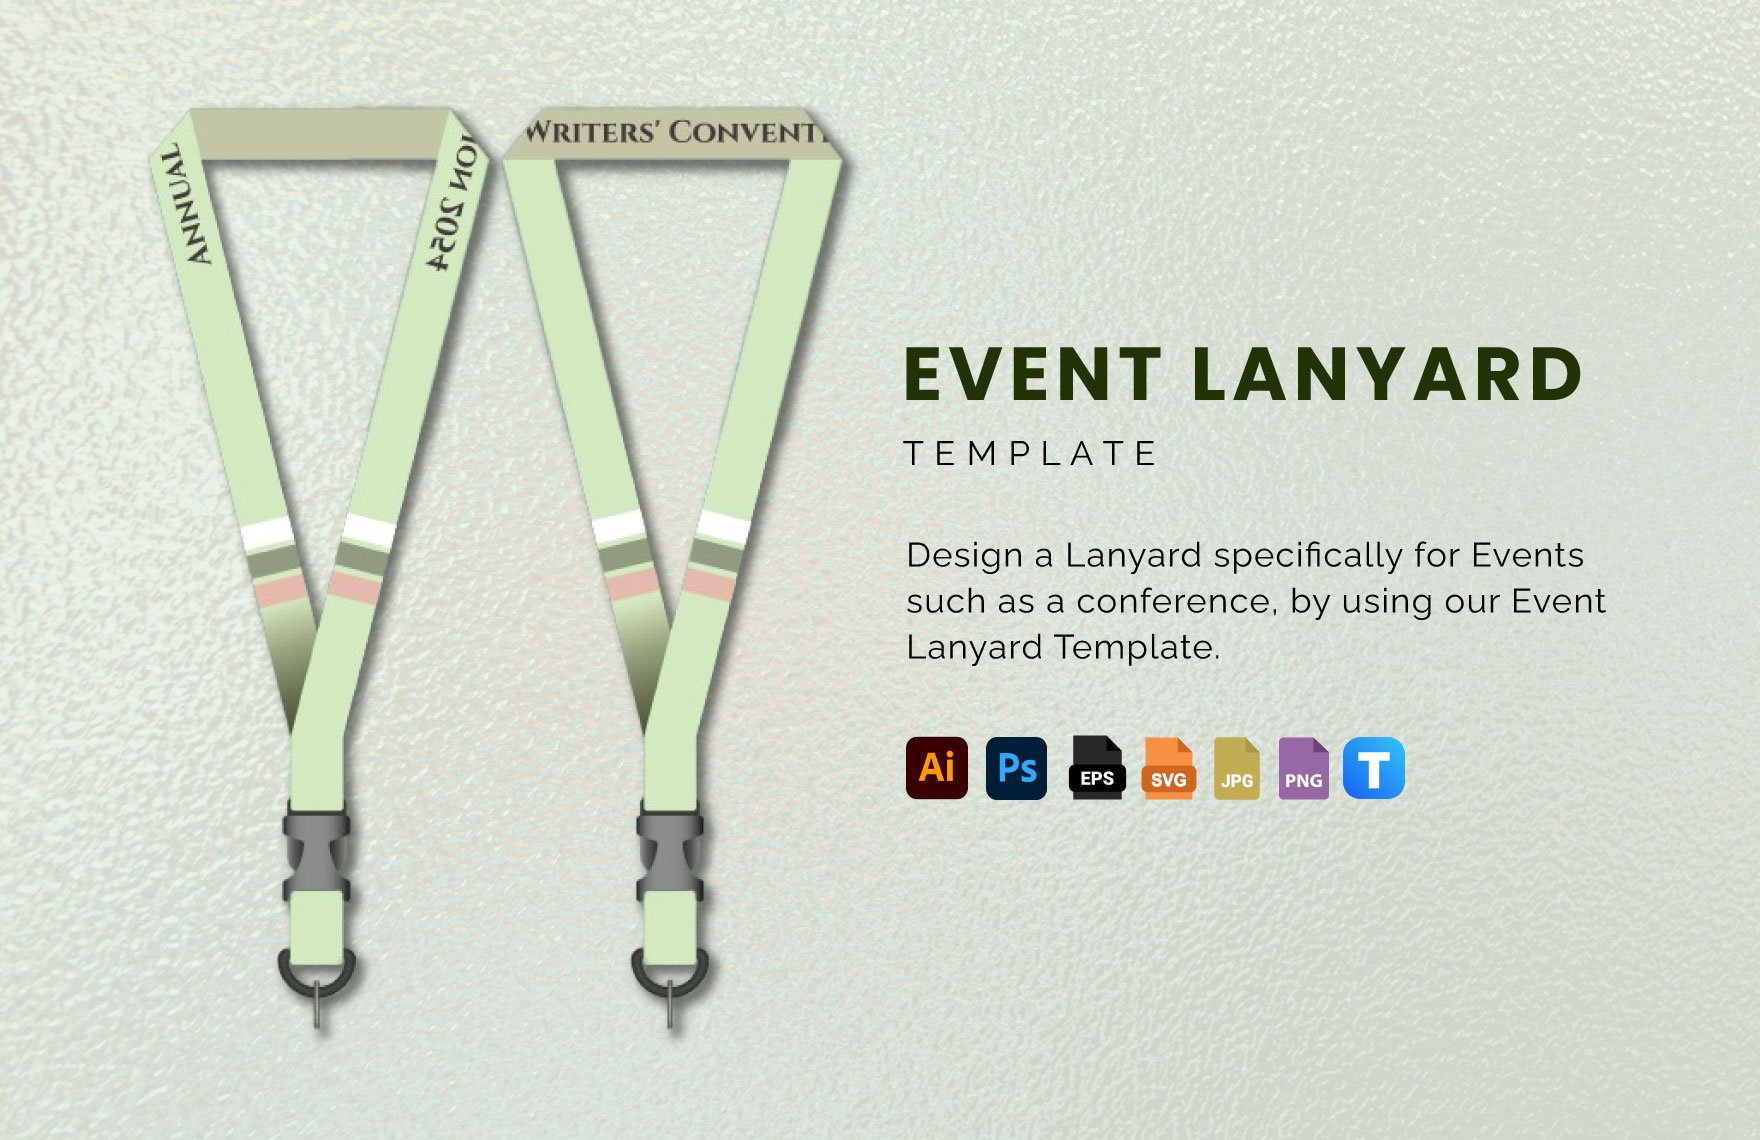 Free Event Lanyard Template in Illustrator, PSD, EPS, SVG, JPG, PNG